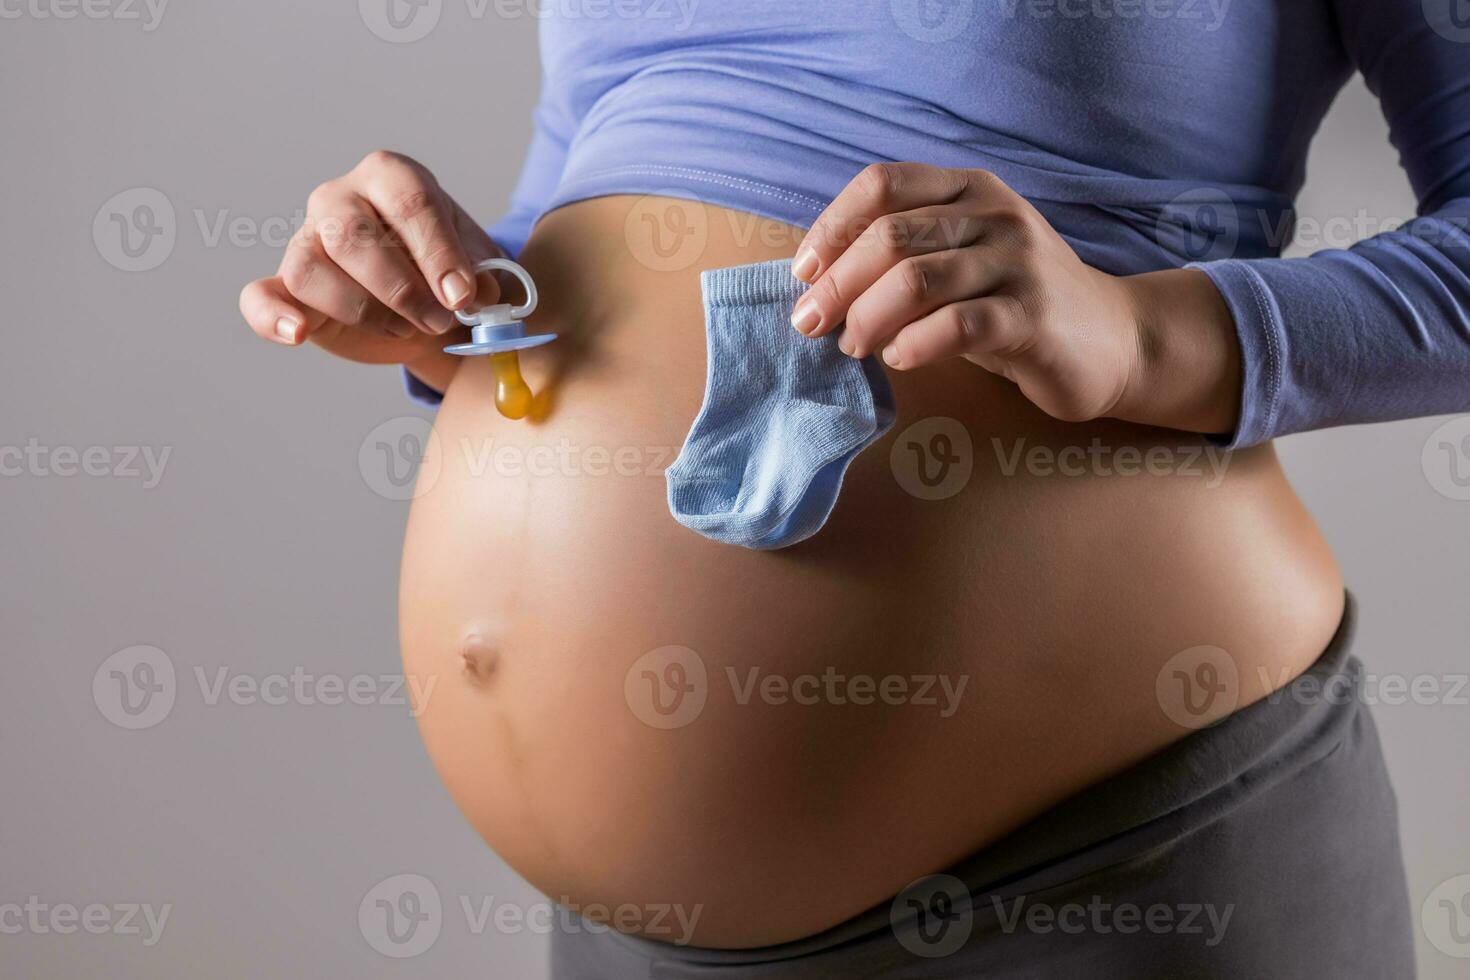 Image of stomach of pregnant woman with holding pacifier and socks for baby boy on gray background. photo